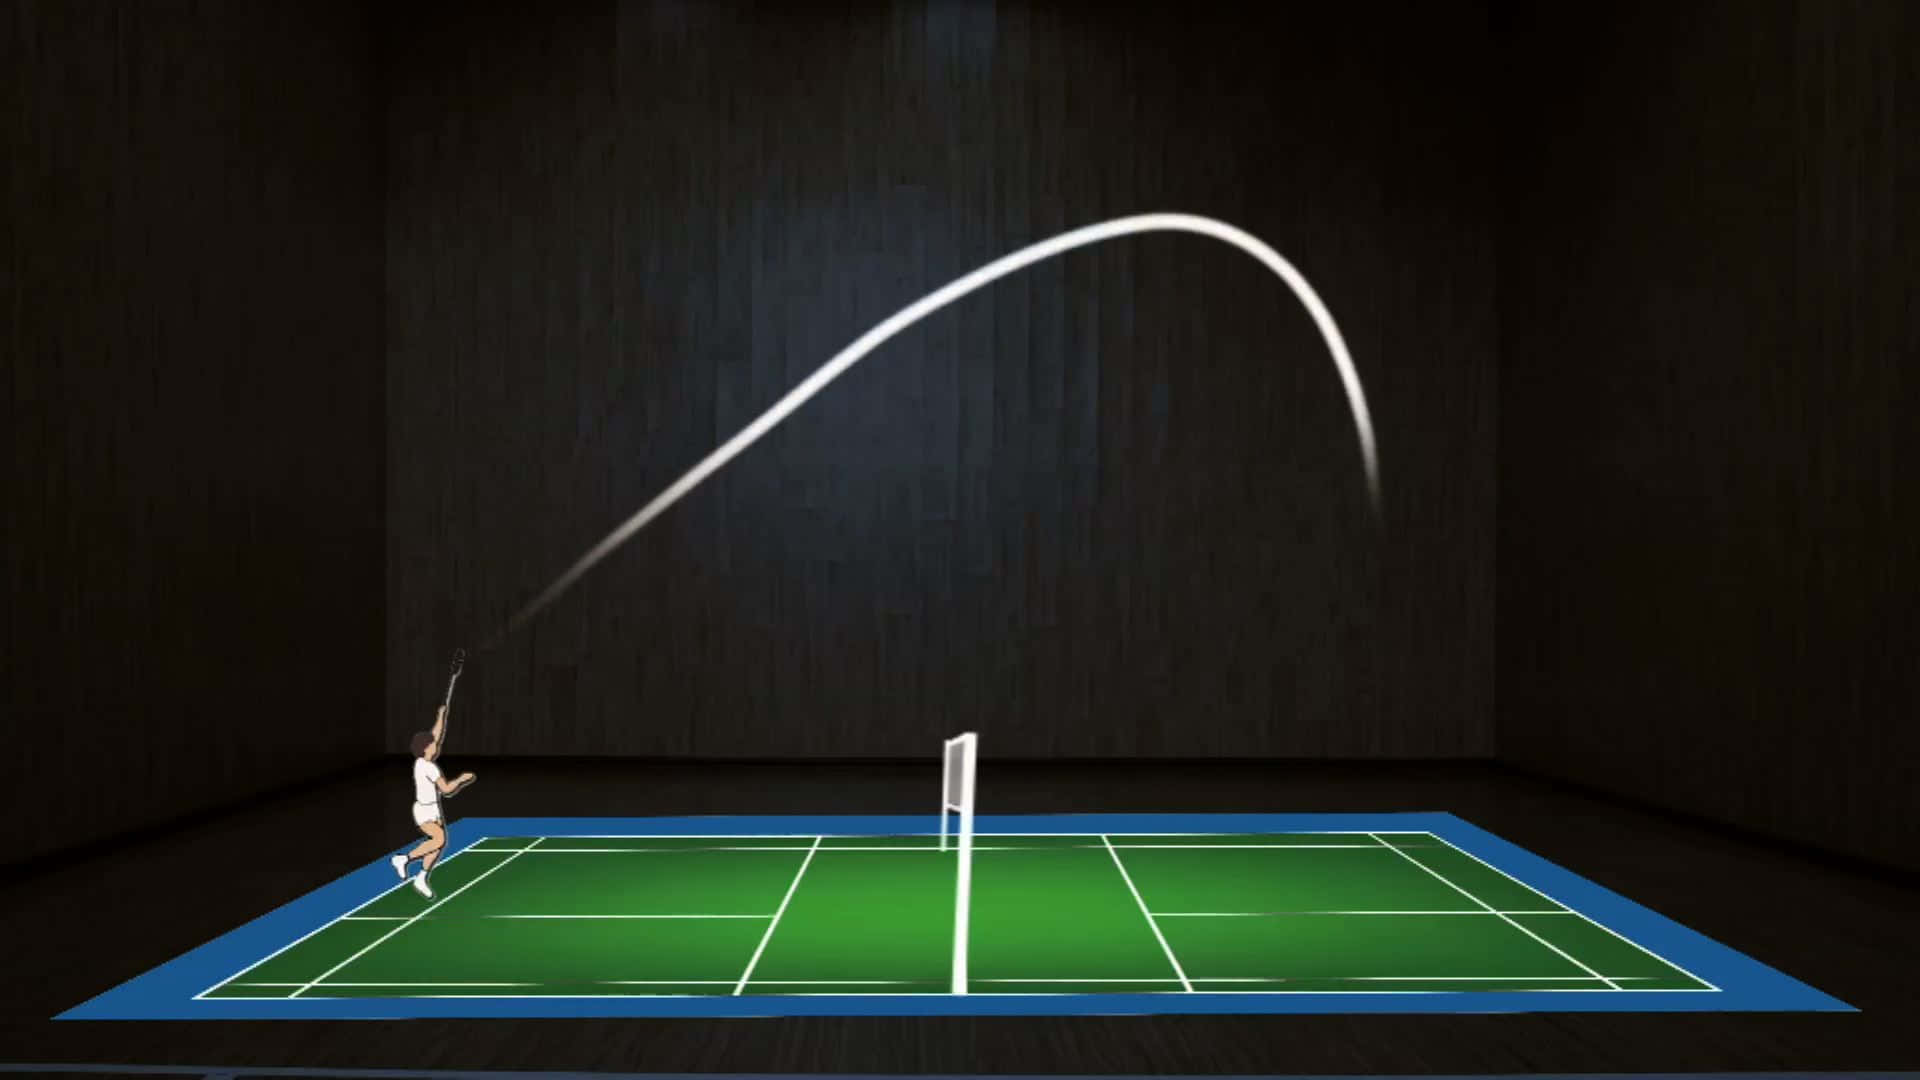 Athlete competing during a badminton match illuminated by sunlight